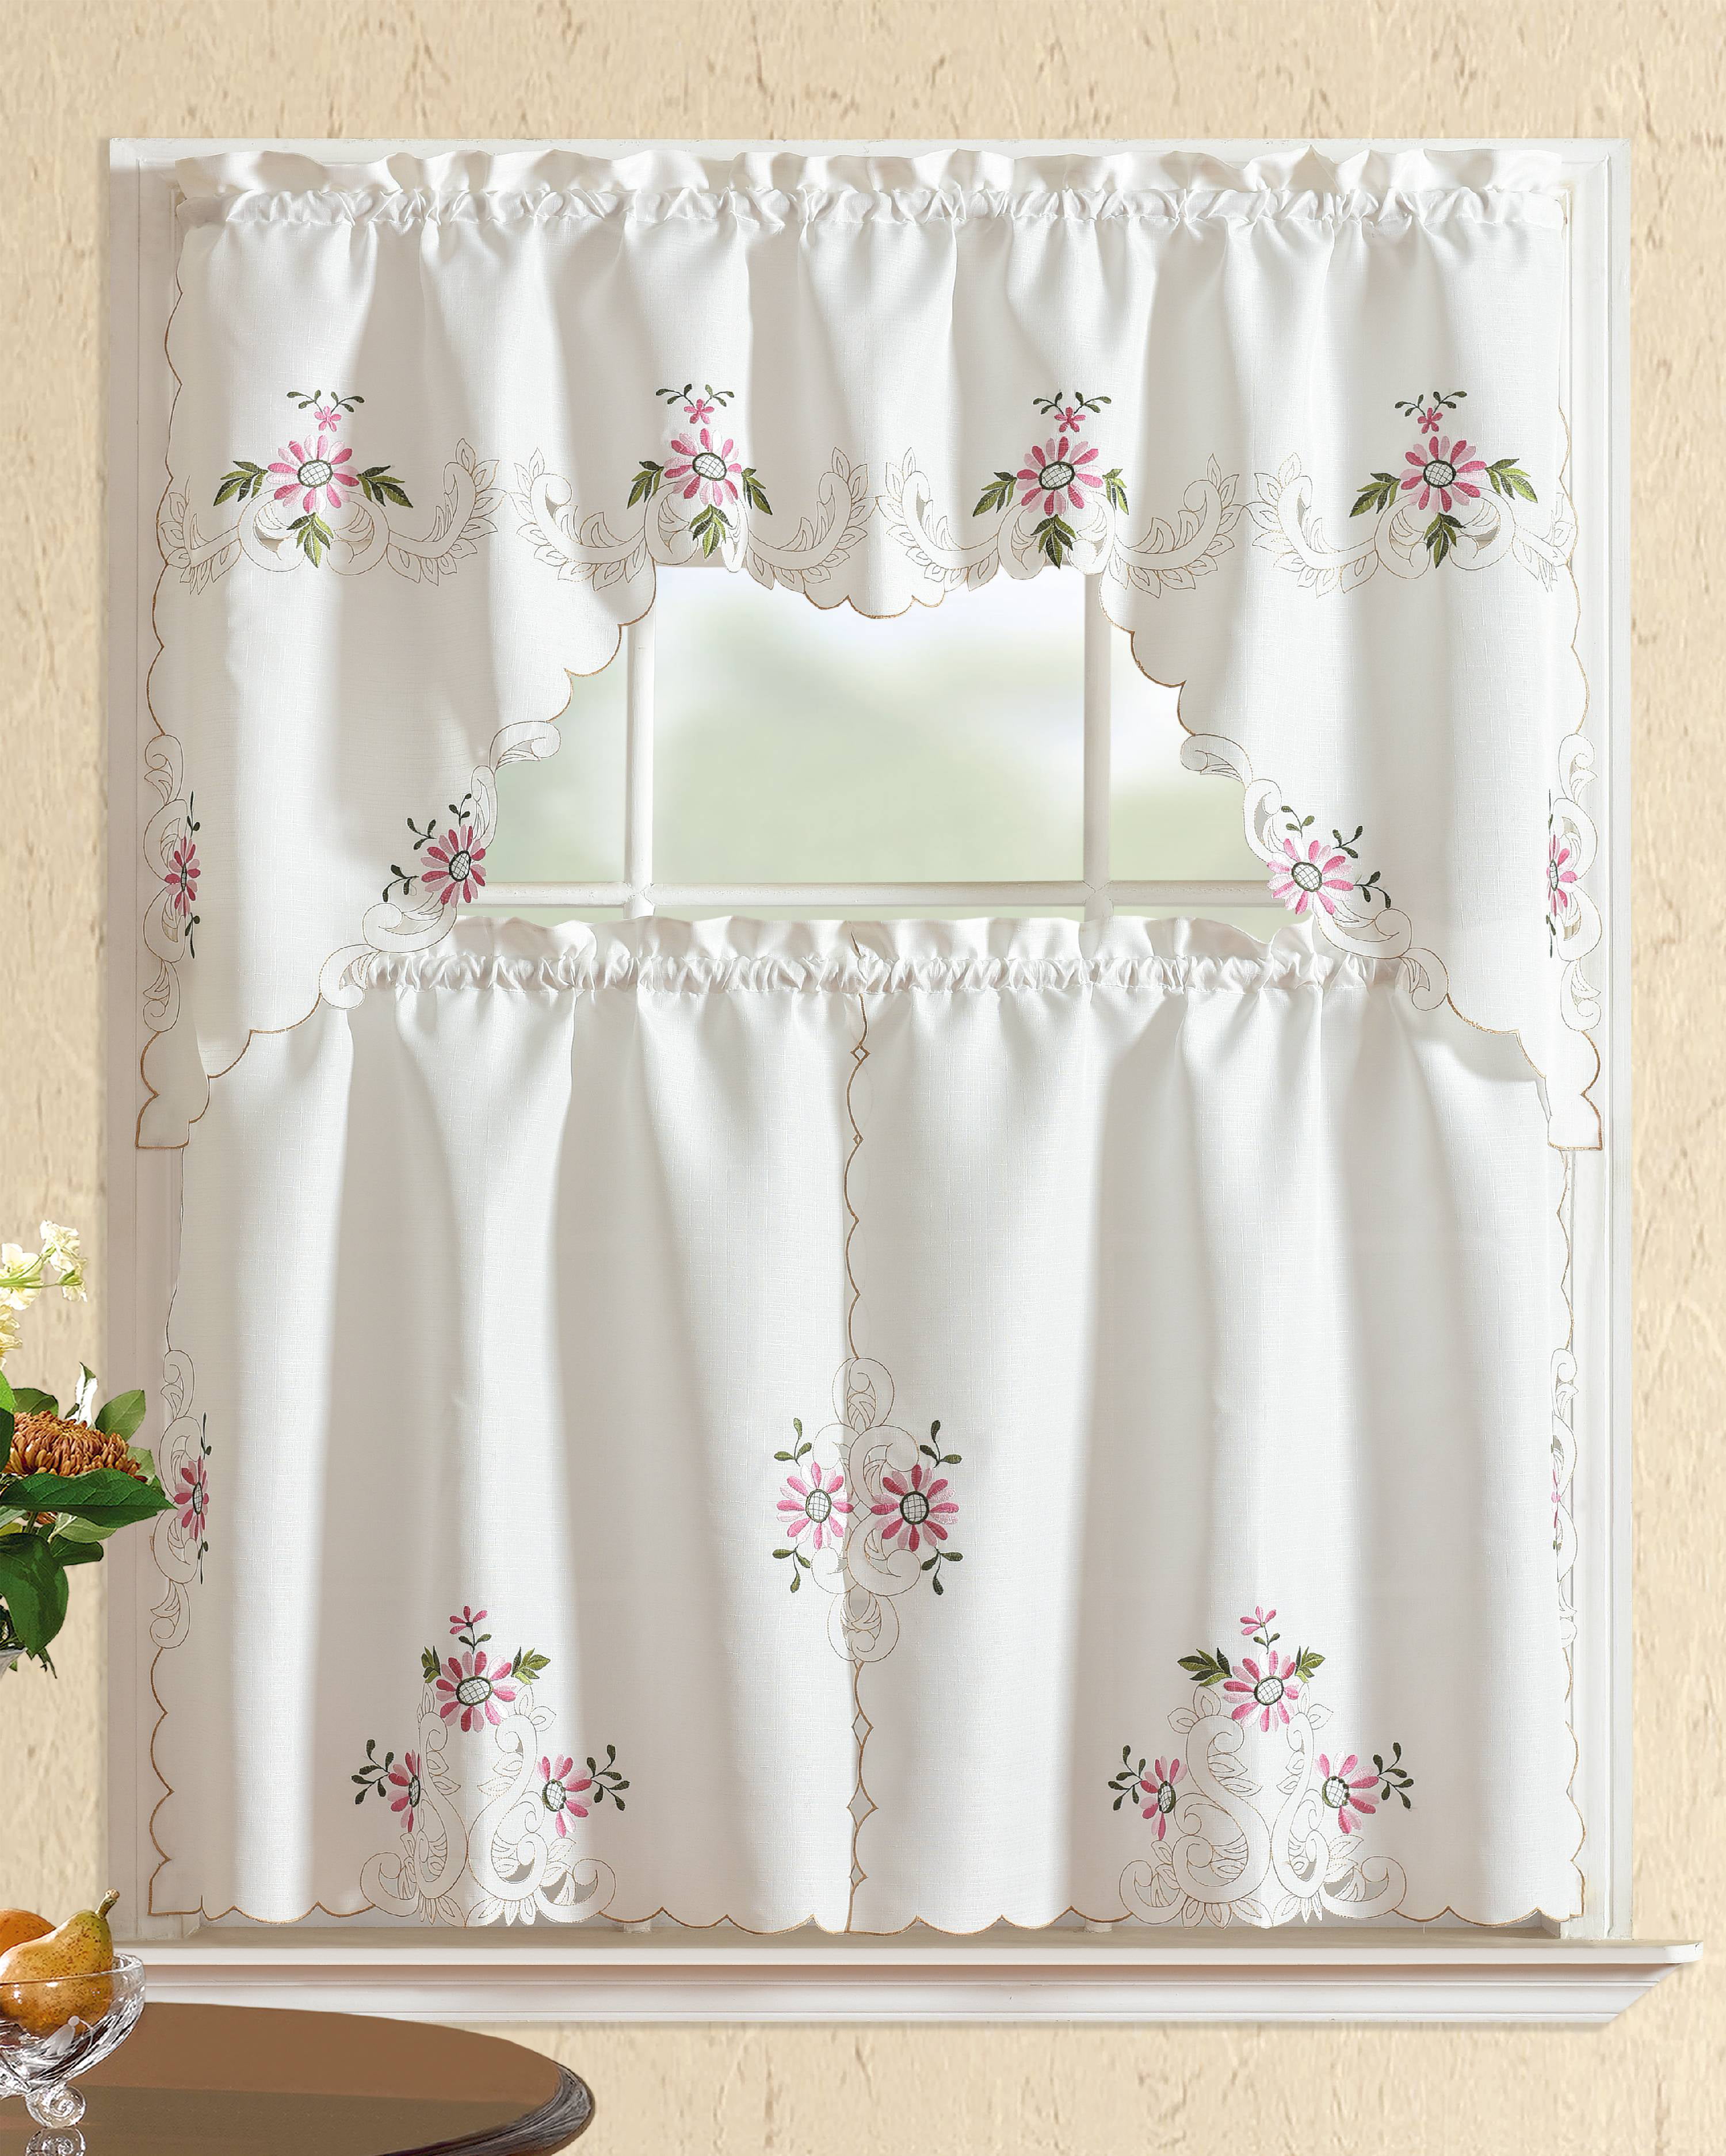 Kitchen Curtains Valances And Swags Sets Kitchen Swag Curtain Valance ...